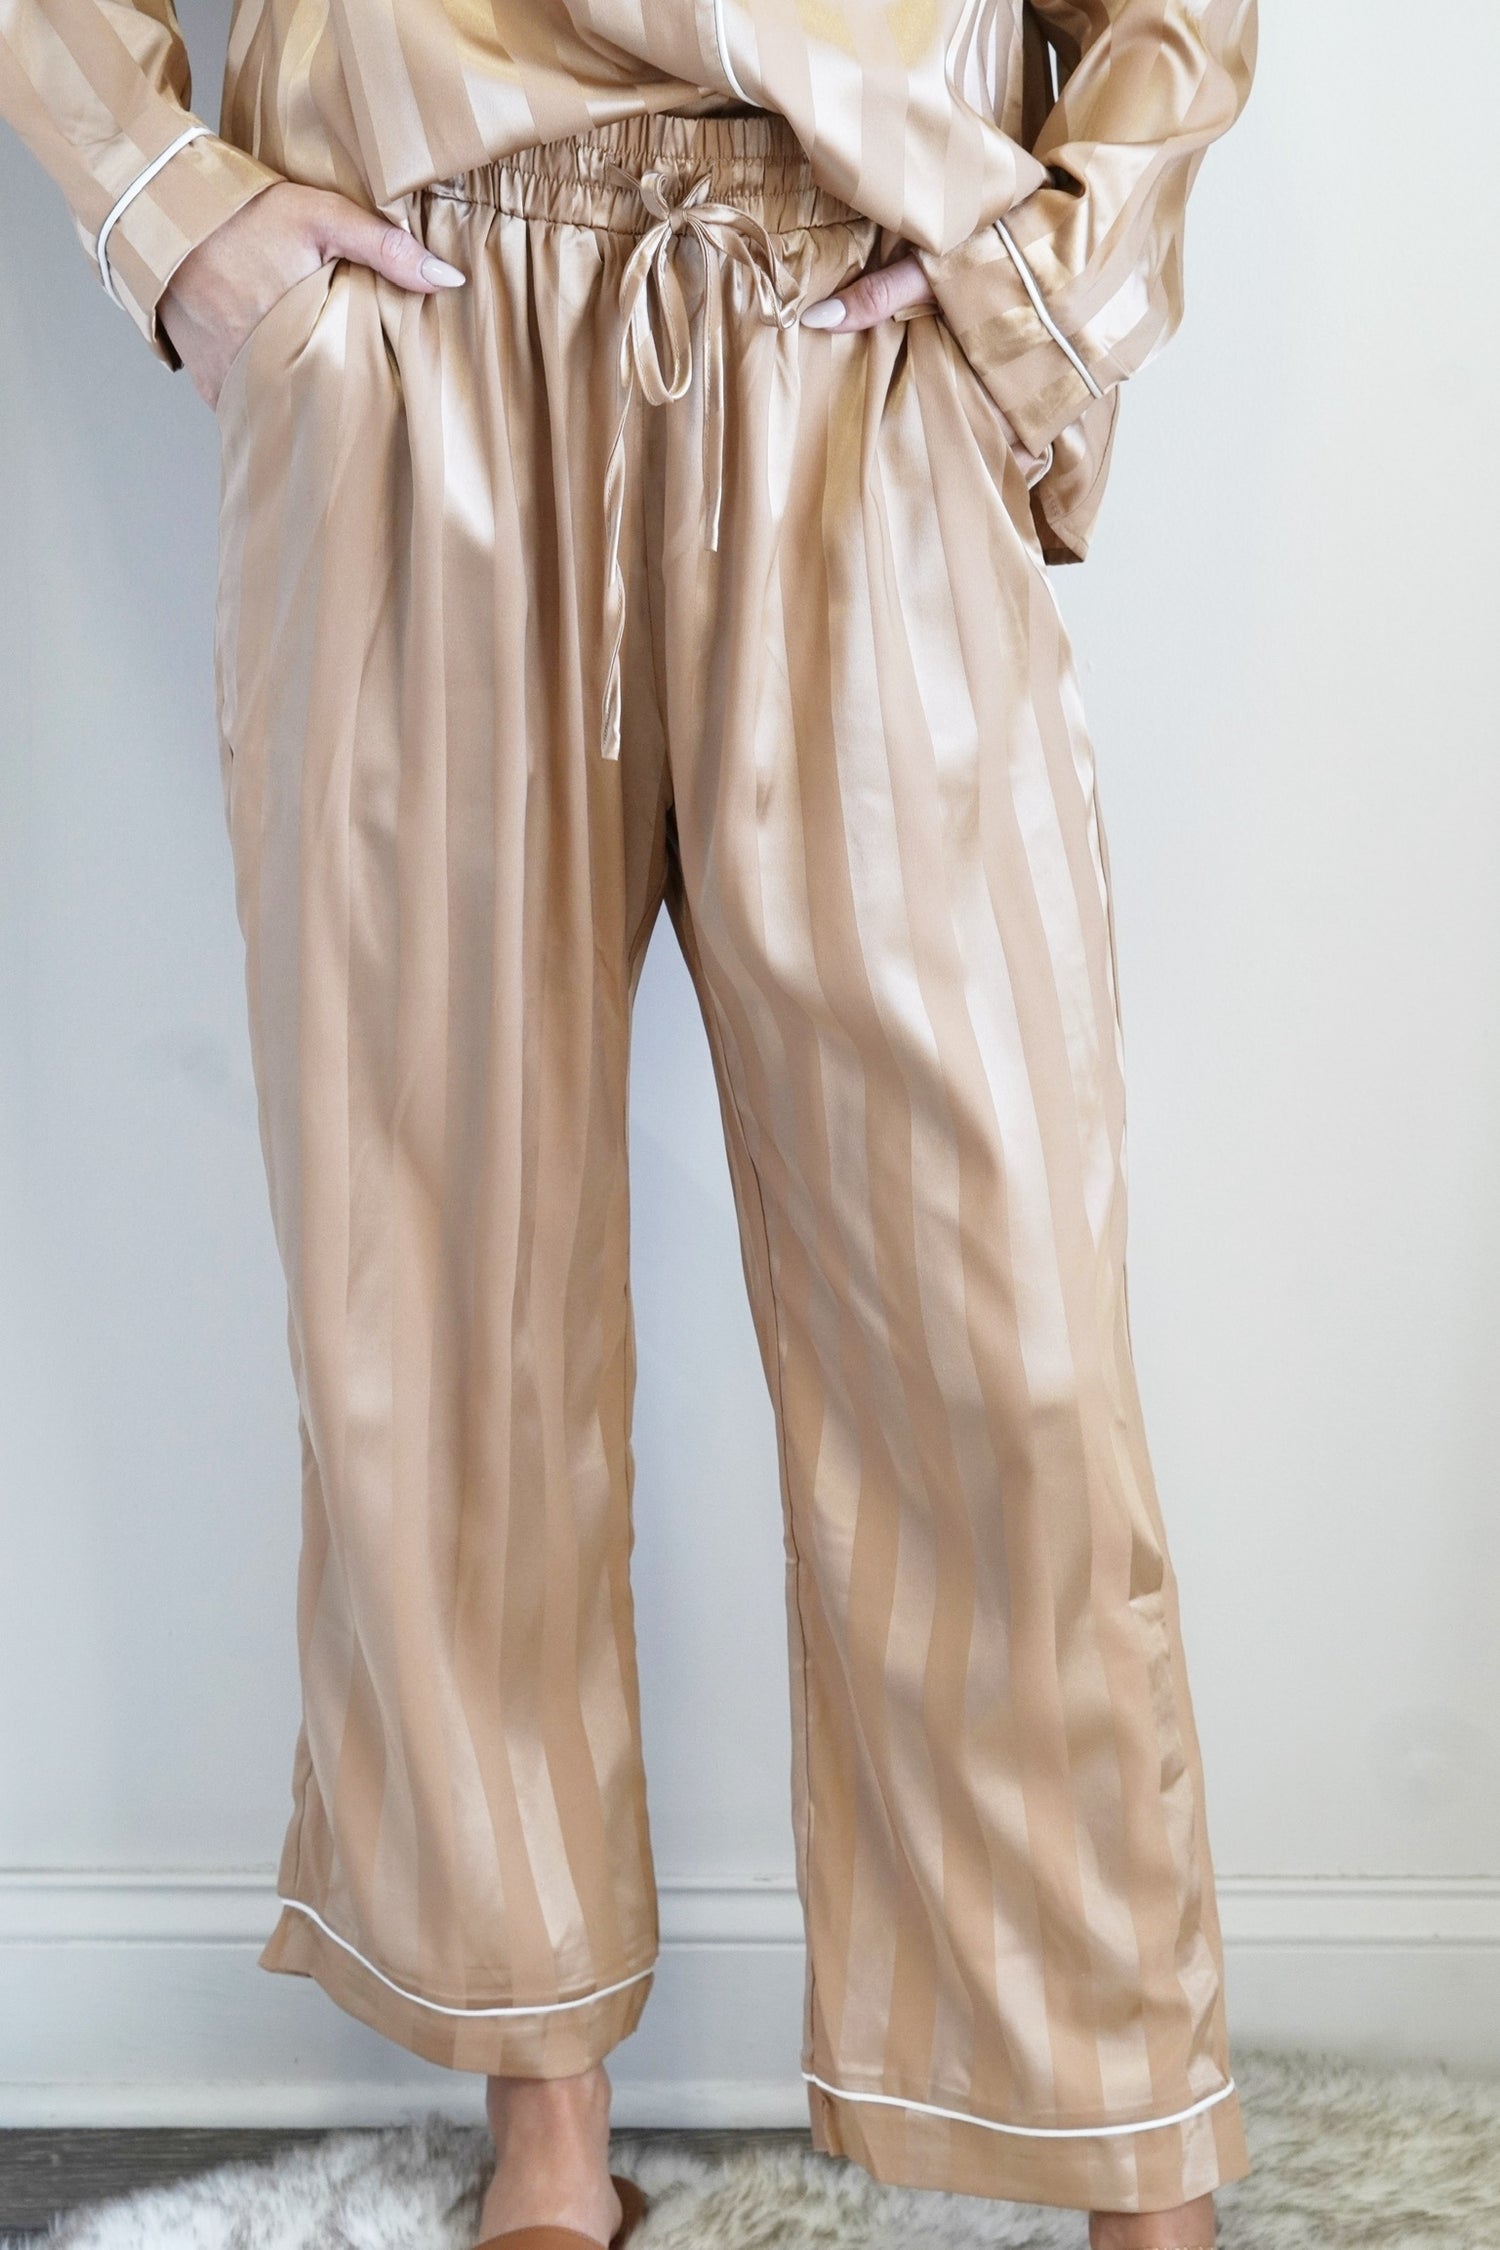 Elastic Waistband w/ Drawstring Two Toned Stripes Colors:  Gold White Trim Full Length Pants Relaxed Fit 100% Polyester  